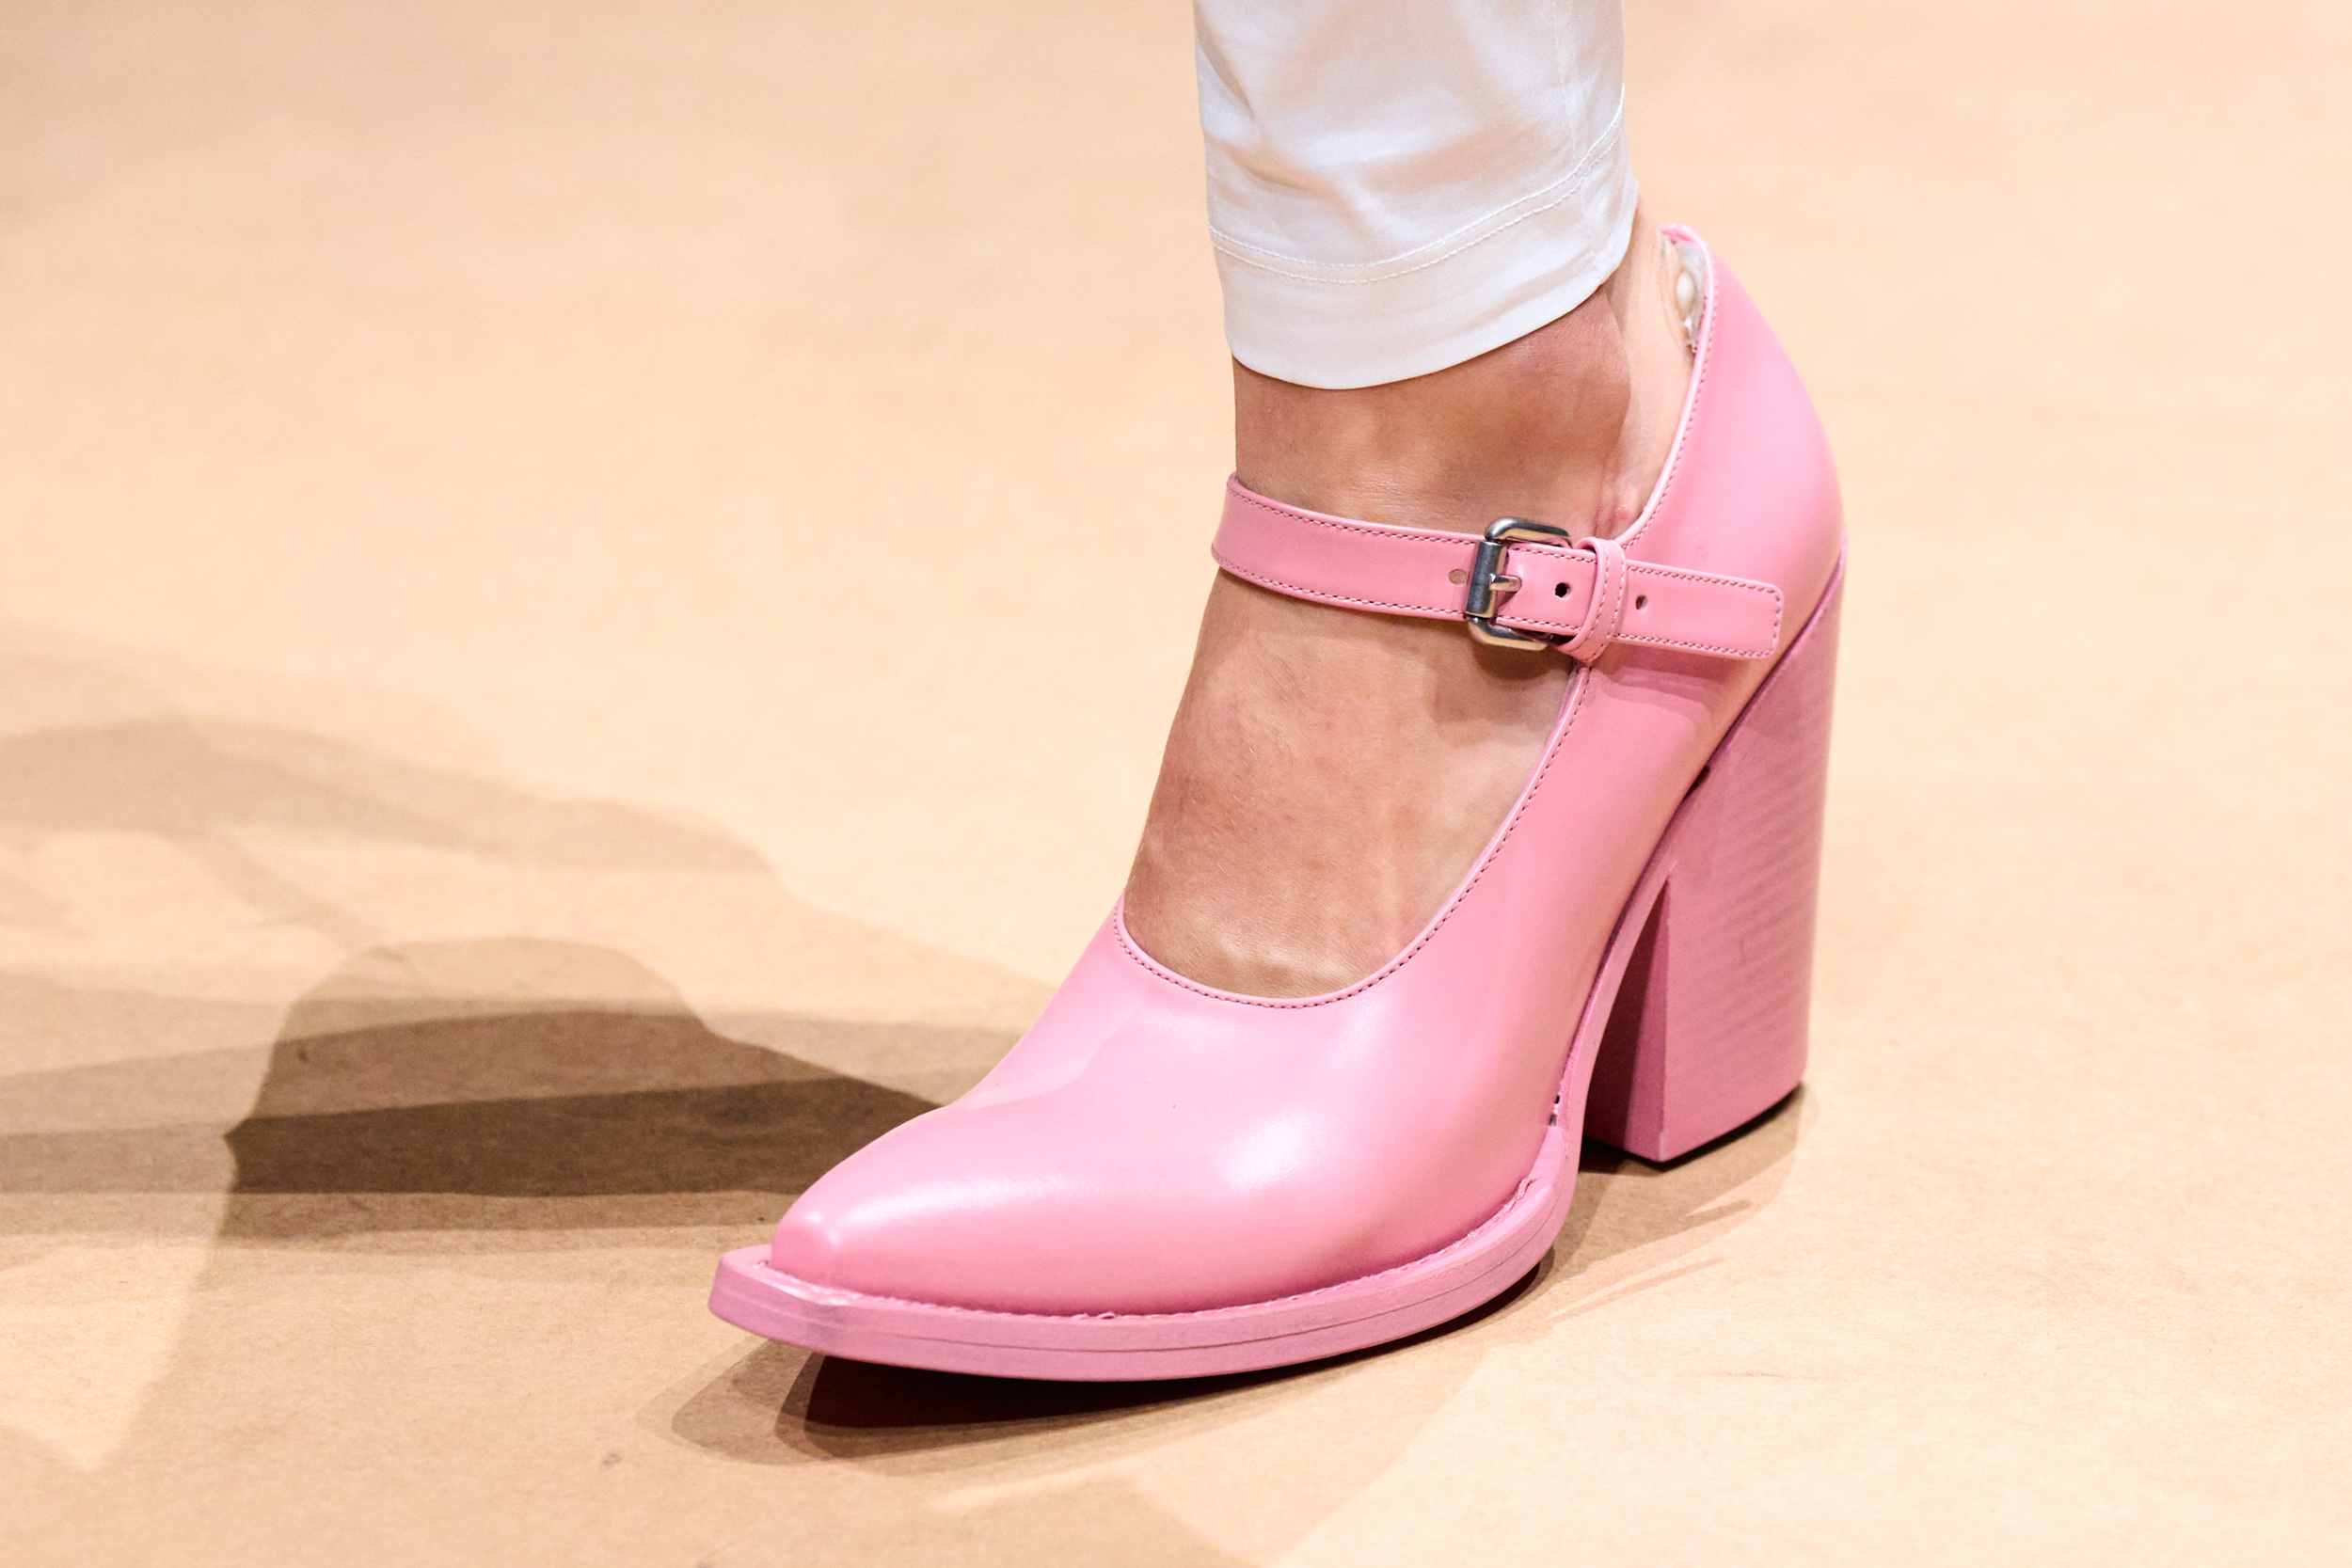 Pointed Toe Shoe Spring 2023 Fashion Trend | The Impression